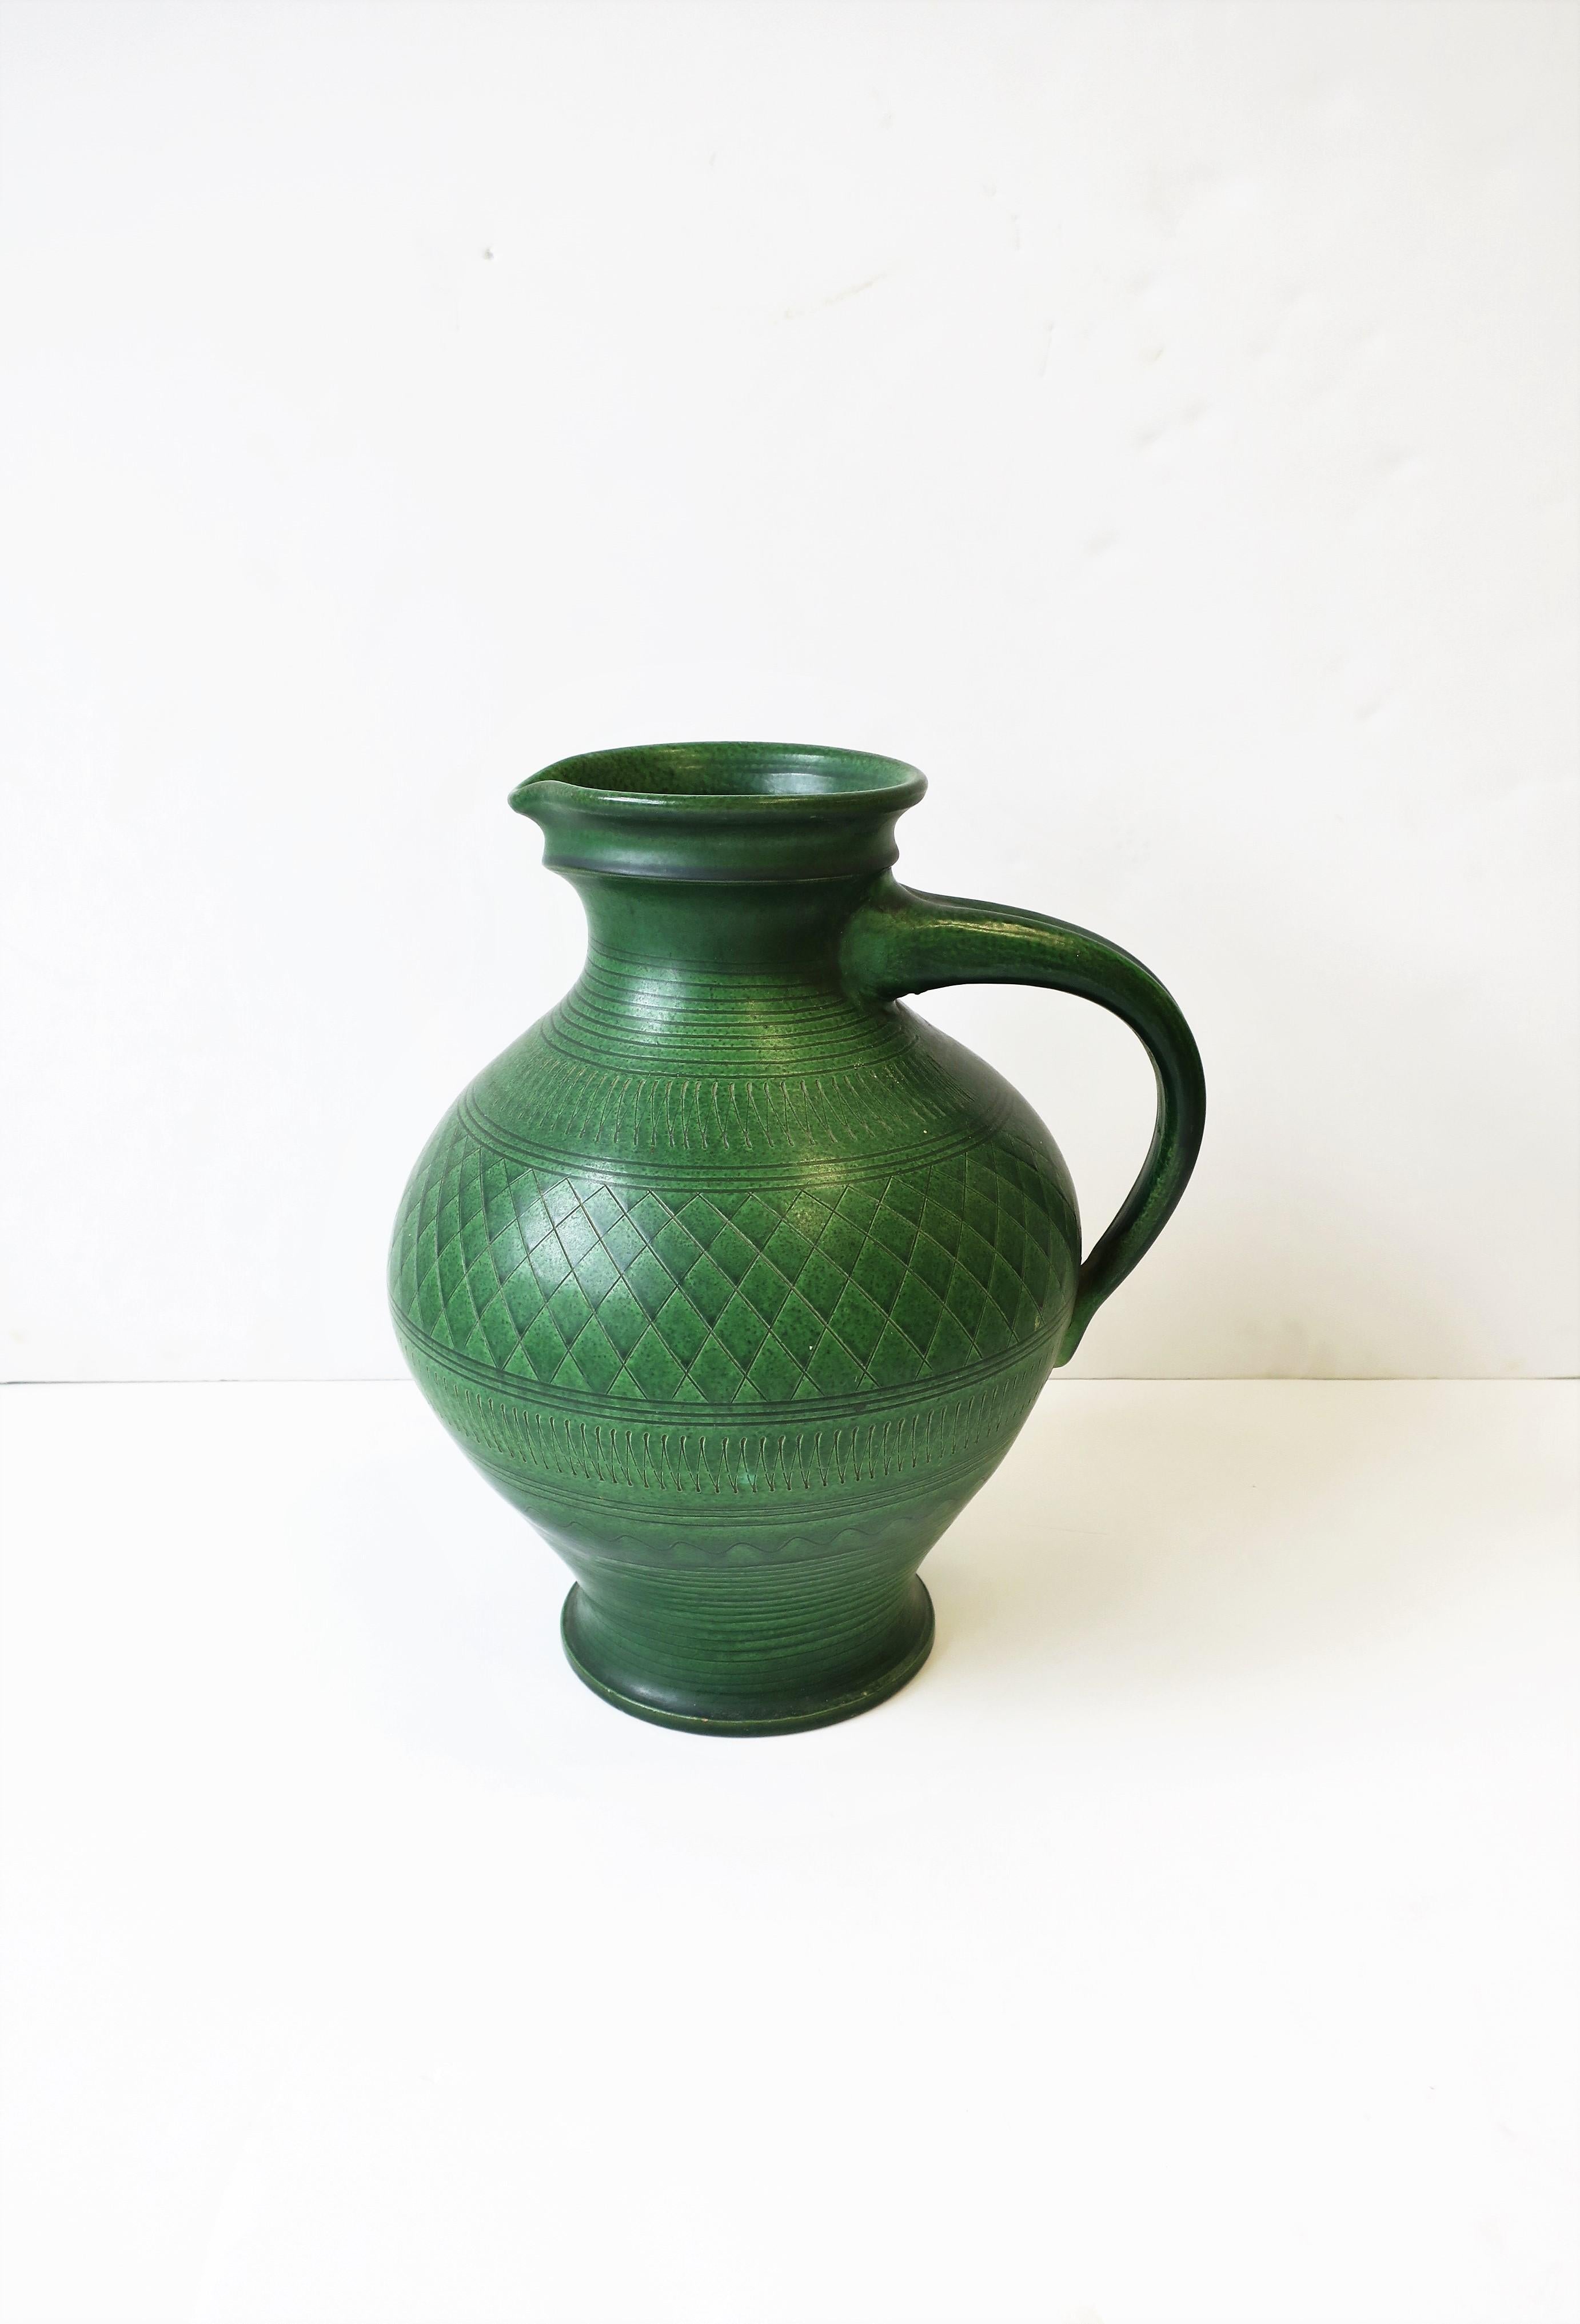 A relatively large German handmade (thrown) green pottery pitcher or vessel/vase, by Wilhelm Kagel, circa 20th century, West Germany. Piece is in the Art Nouveau style. Beautiful handcut decorative pattern around. Maker's mark: WK (Wilhelm Kagel)